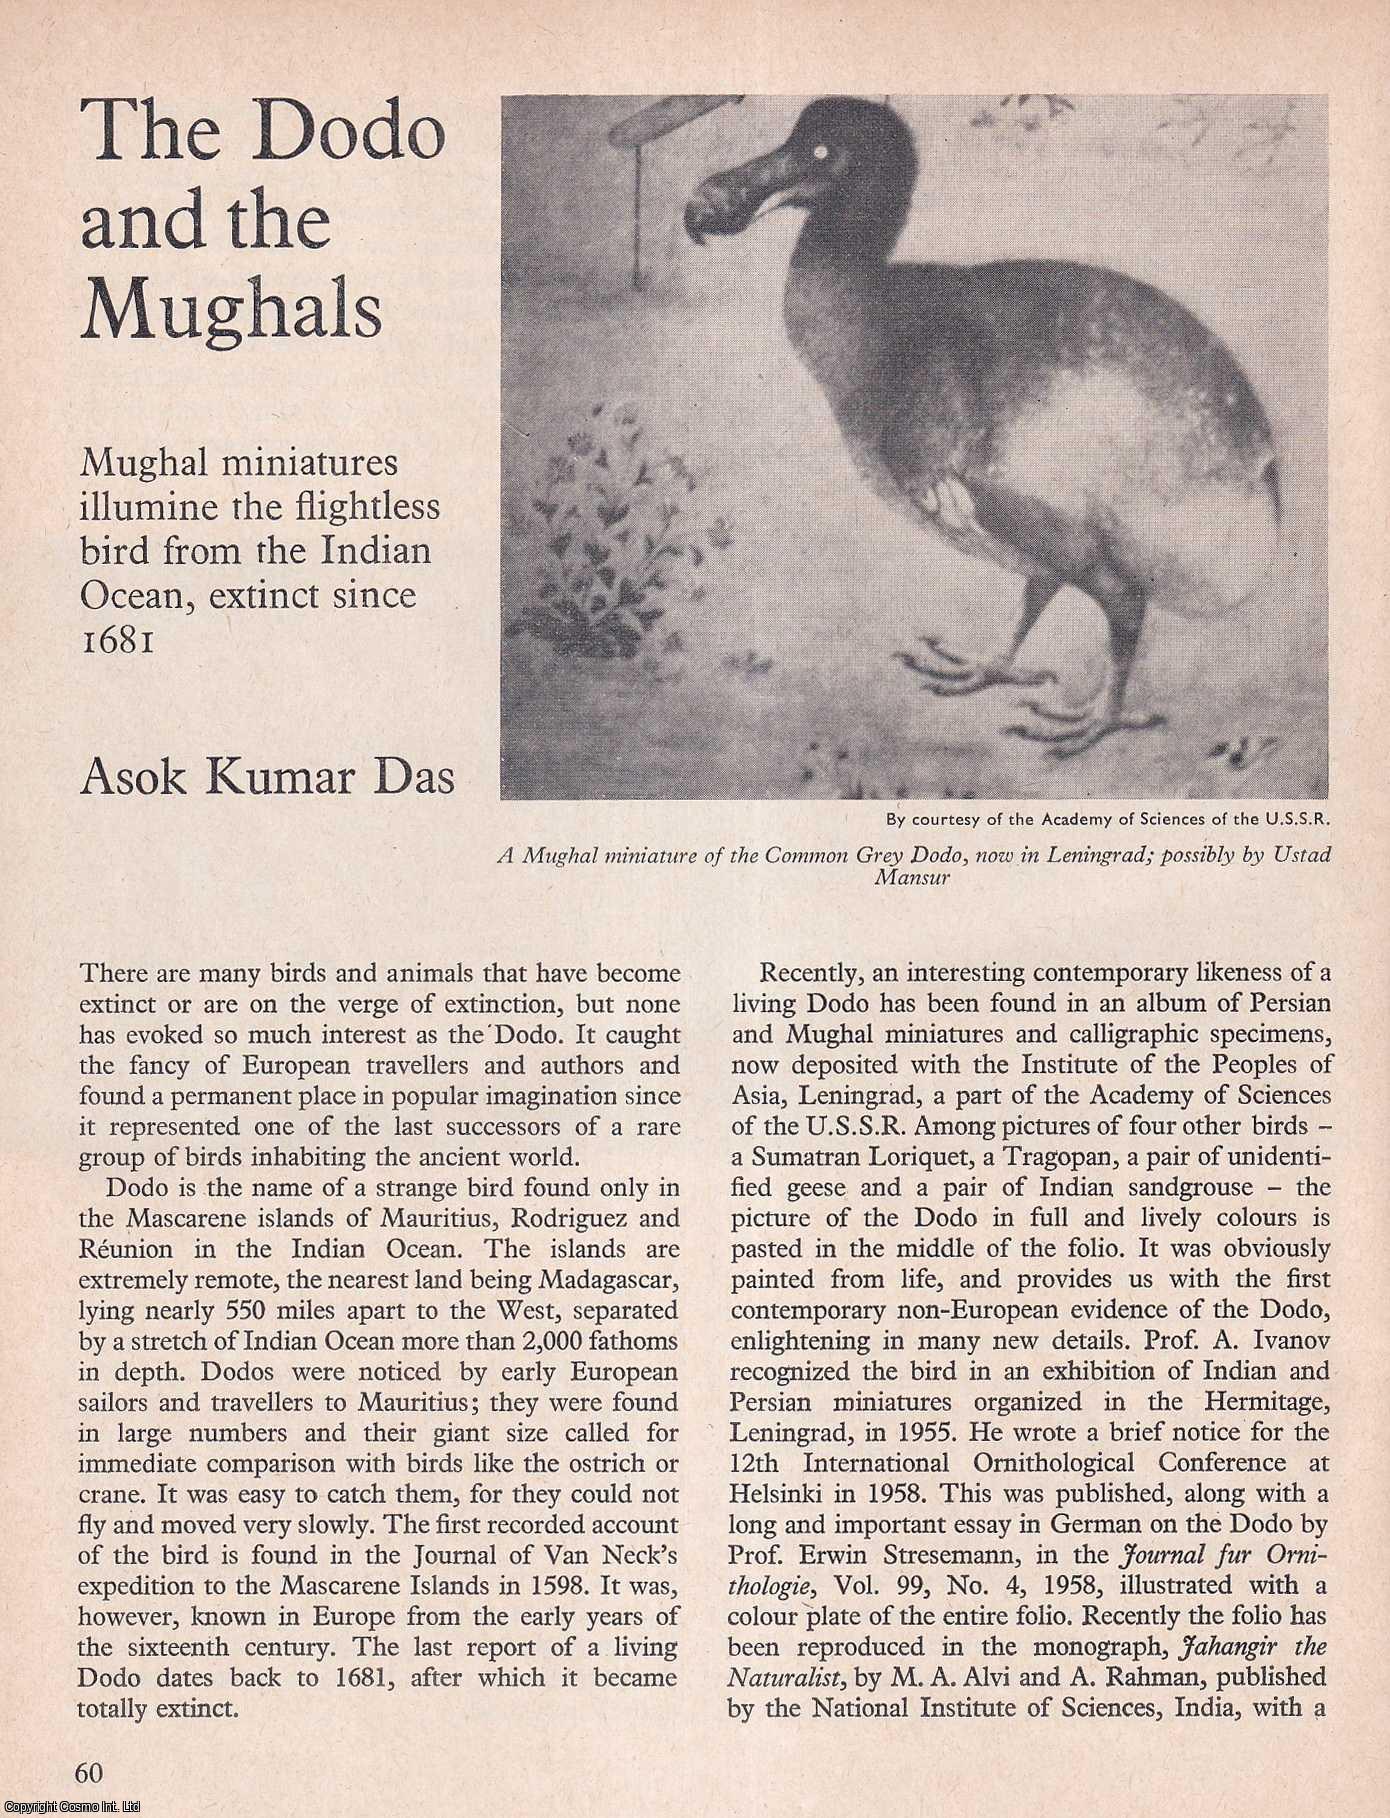 Asok Kumar Das - The Dodo and The Mughals: Flightless Bird from The Indian Ocean, Extinct Since 1681. An original article from History Today magazine, 1973.